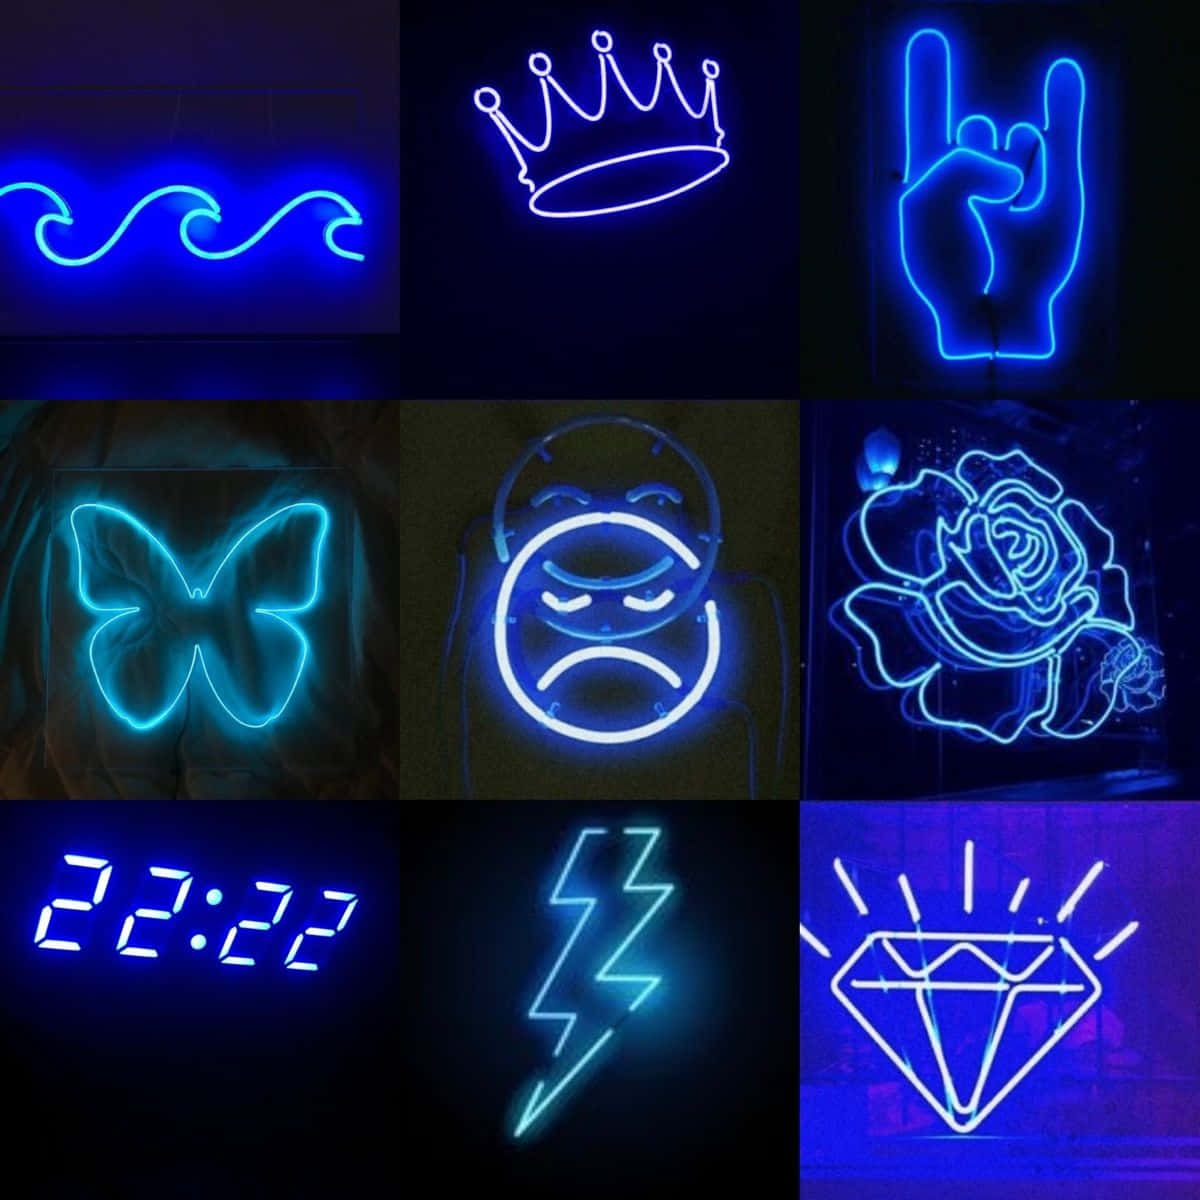 Electric Blue Neon Signs Collage Wallpaper